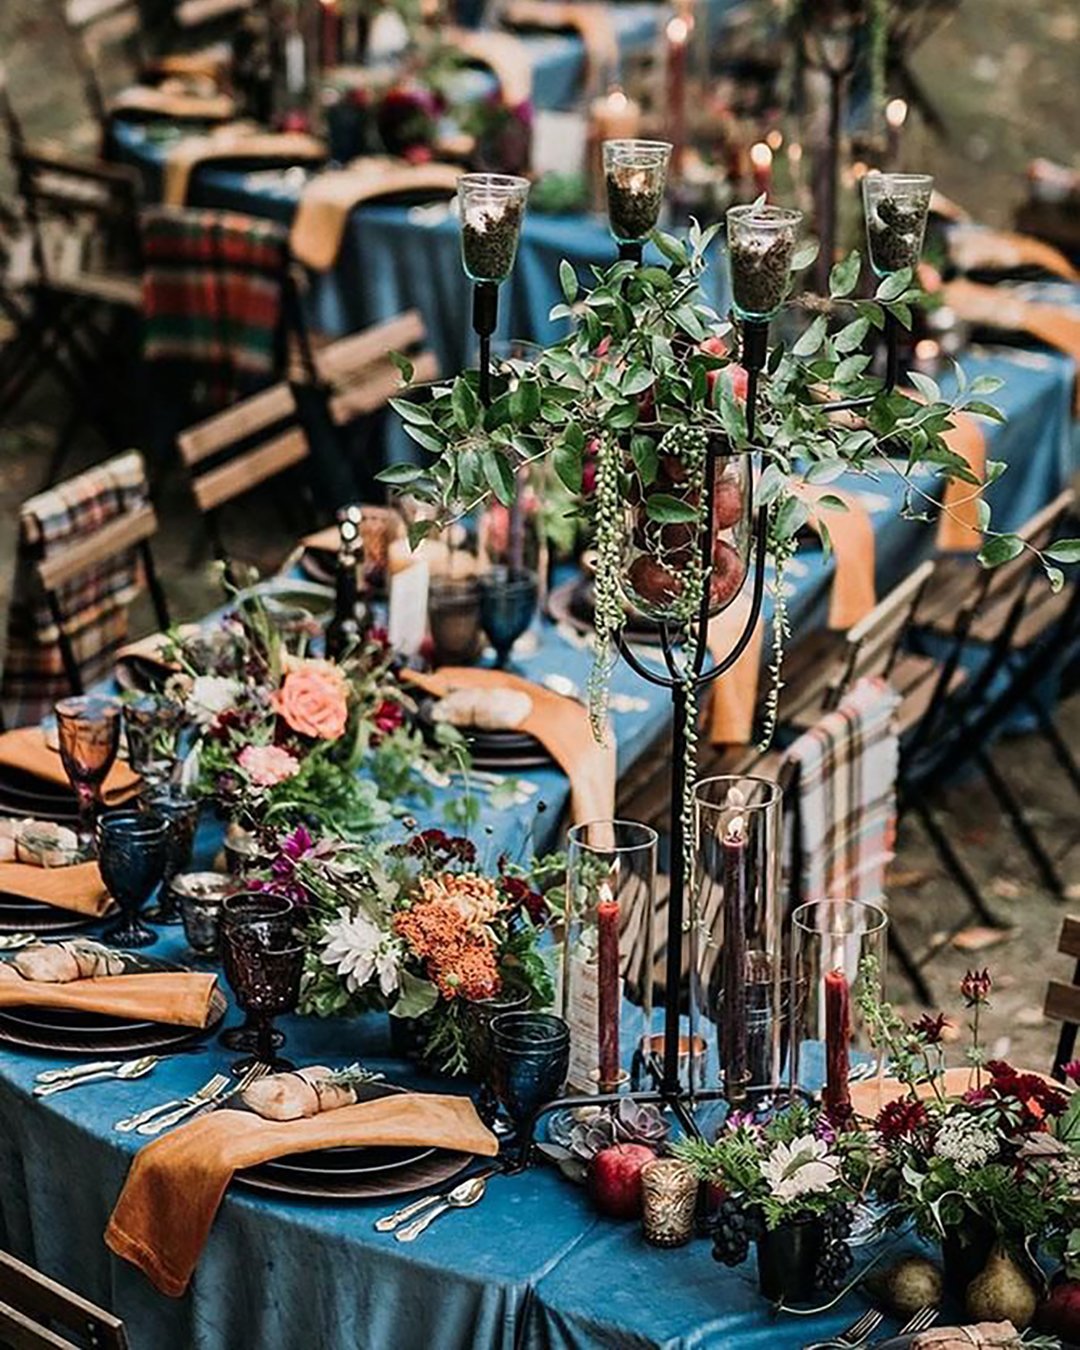 wedding table decorations long zig zag outdoor with greenery and flowers and fruits joshhartmanphotography